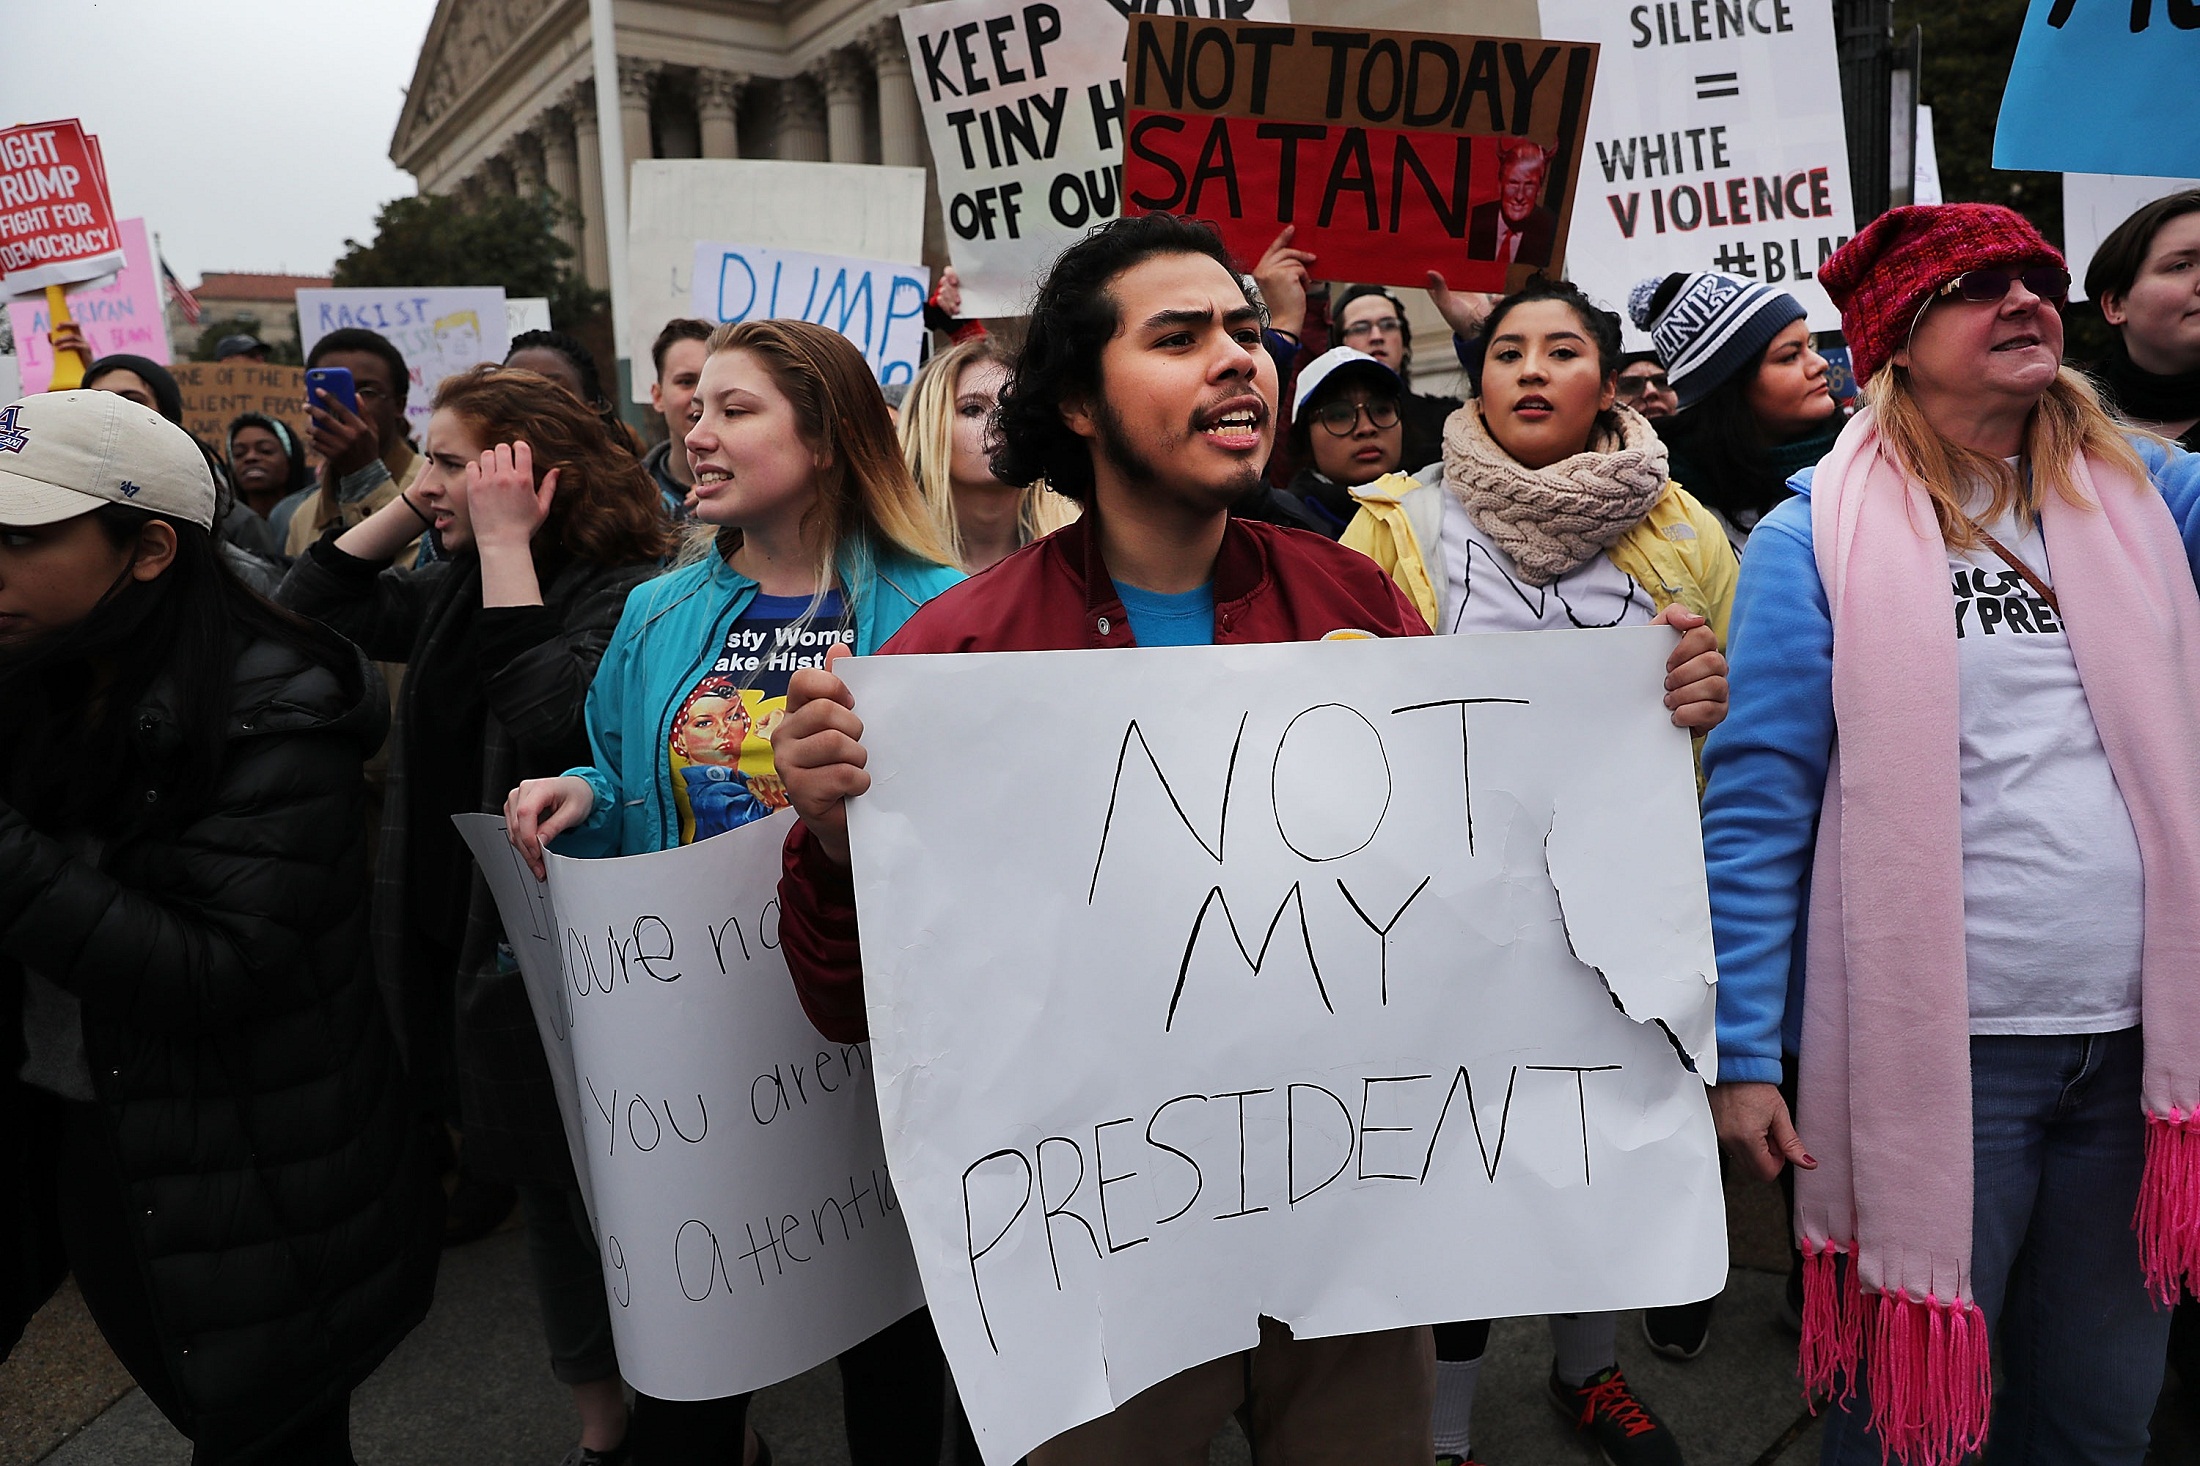 WASHINGTON, DC - JANUARY 20: Anti-Trump protesters demonstrate near the National Mall following the inauguration of President Donald Trump on January 20, 2017 in Washington, DC. Washington and the entire world have watched the transfer of the United States presidency from Barack Obama to Donald Trump, the 45th president.   Spencer Platt/Getty Images/AFP